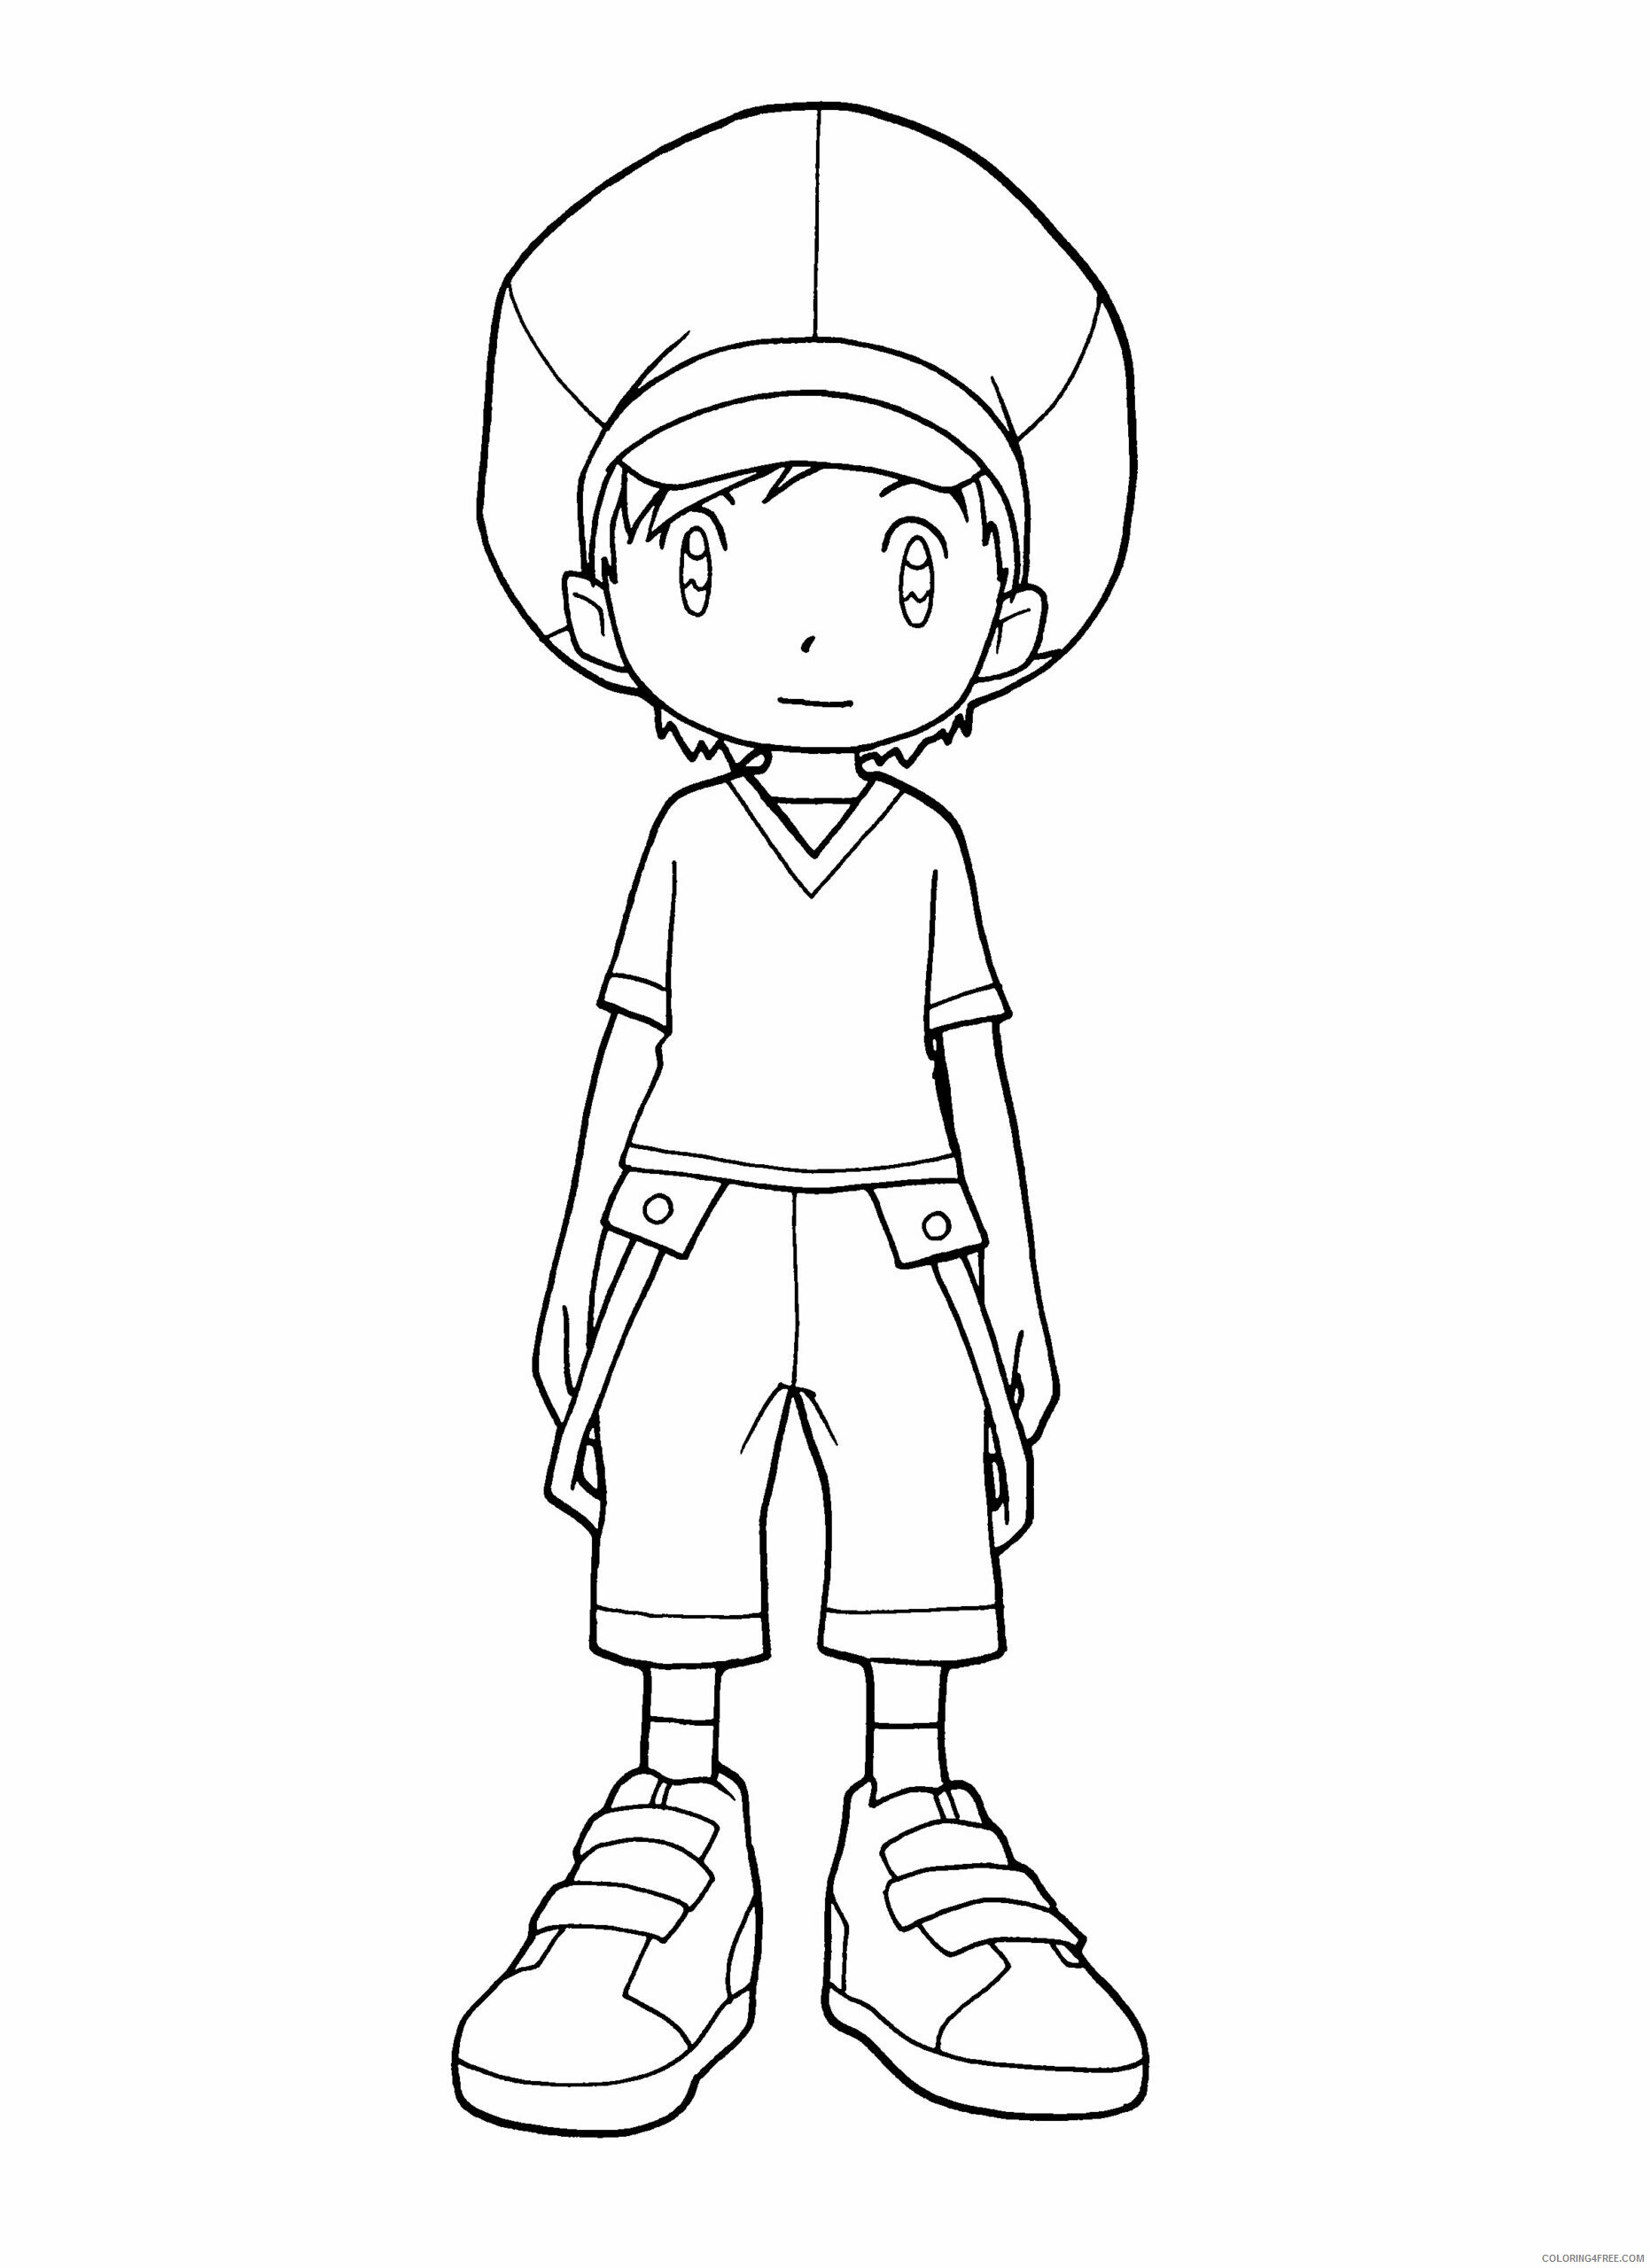 Digimon Printable Coloring Pages Anime digimon 84 2021 0381 Coloring4free